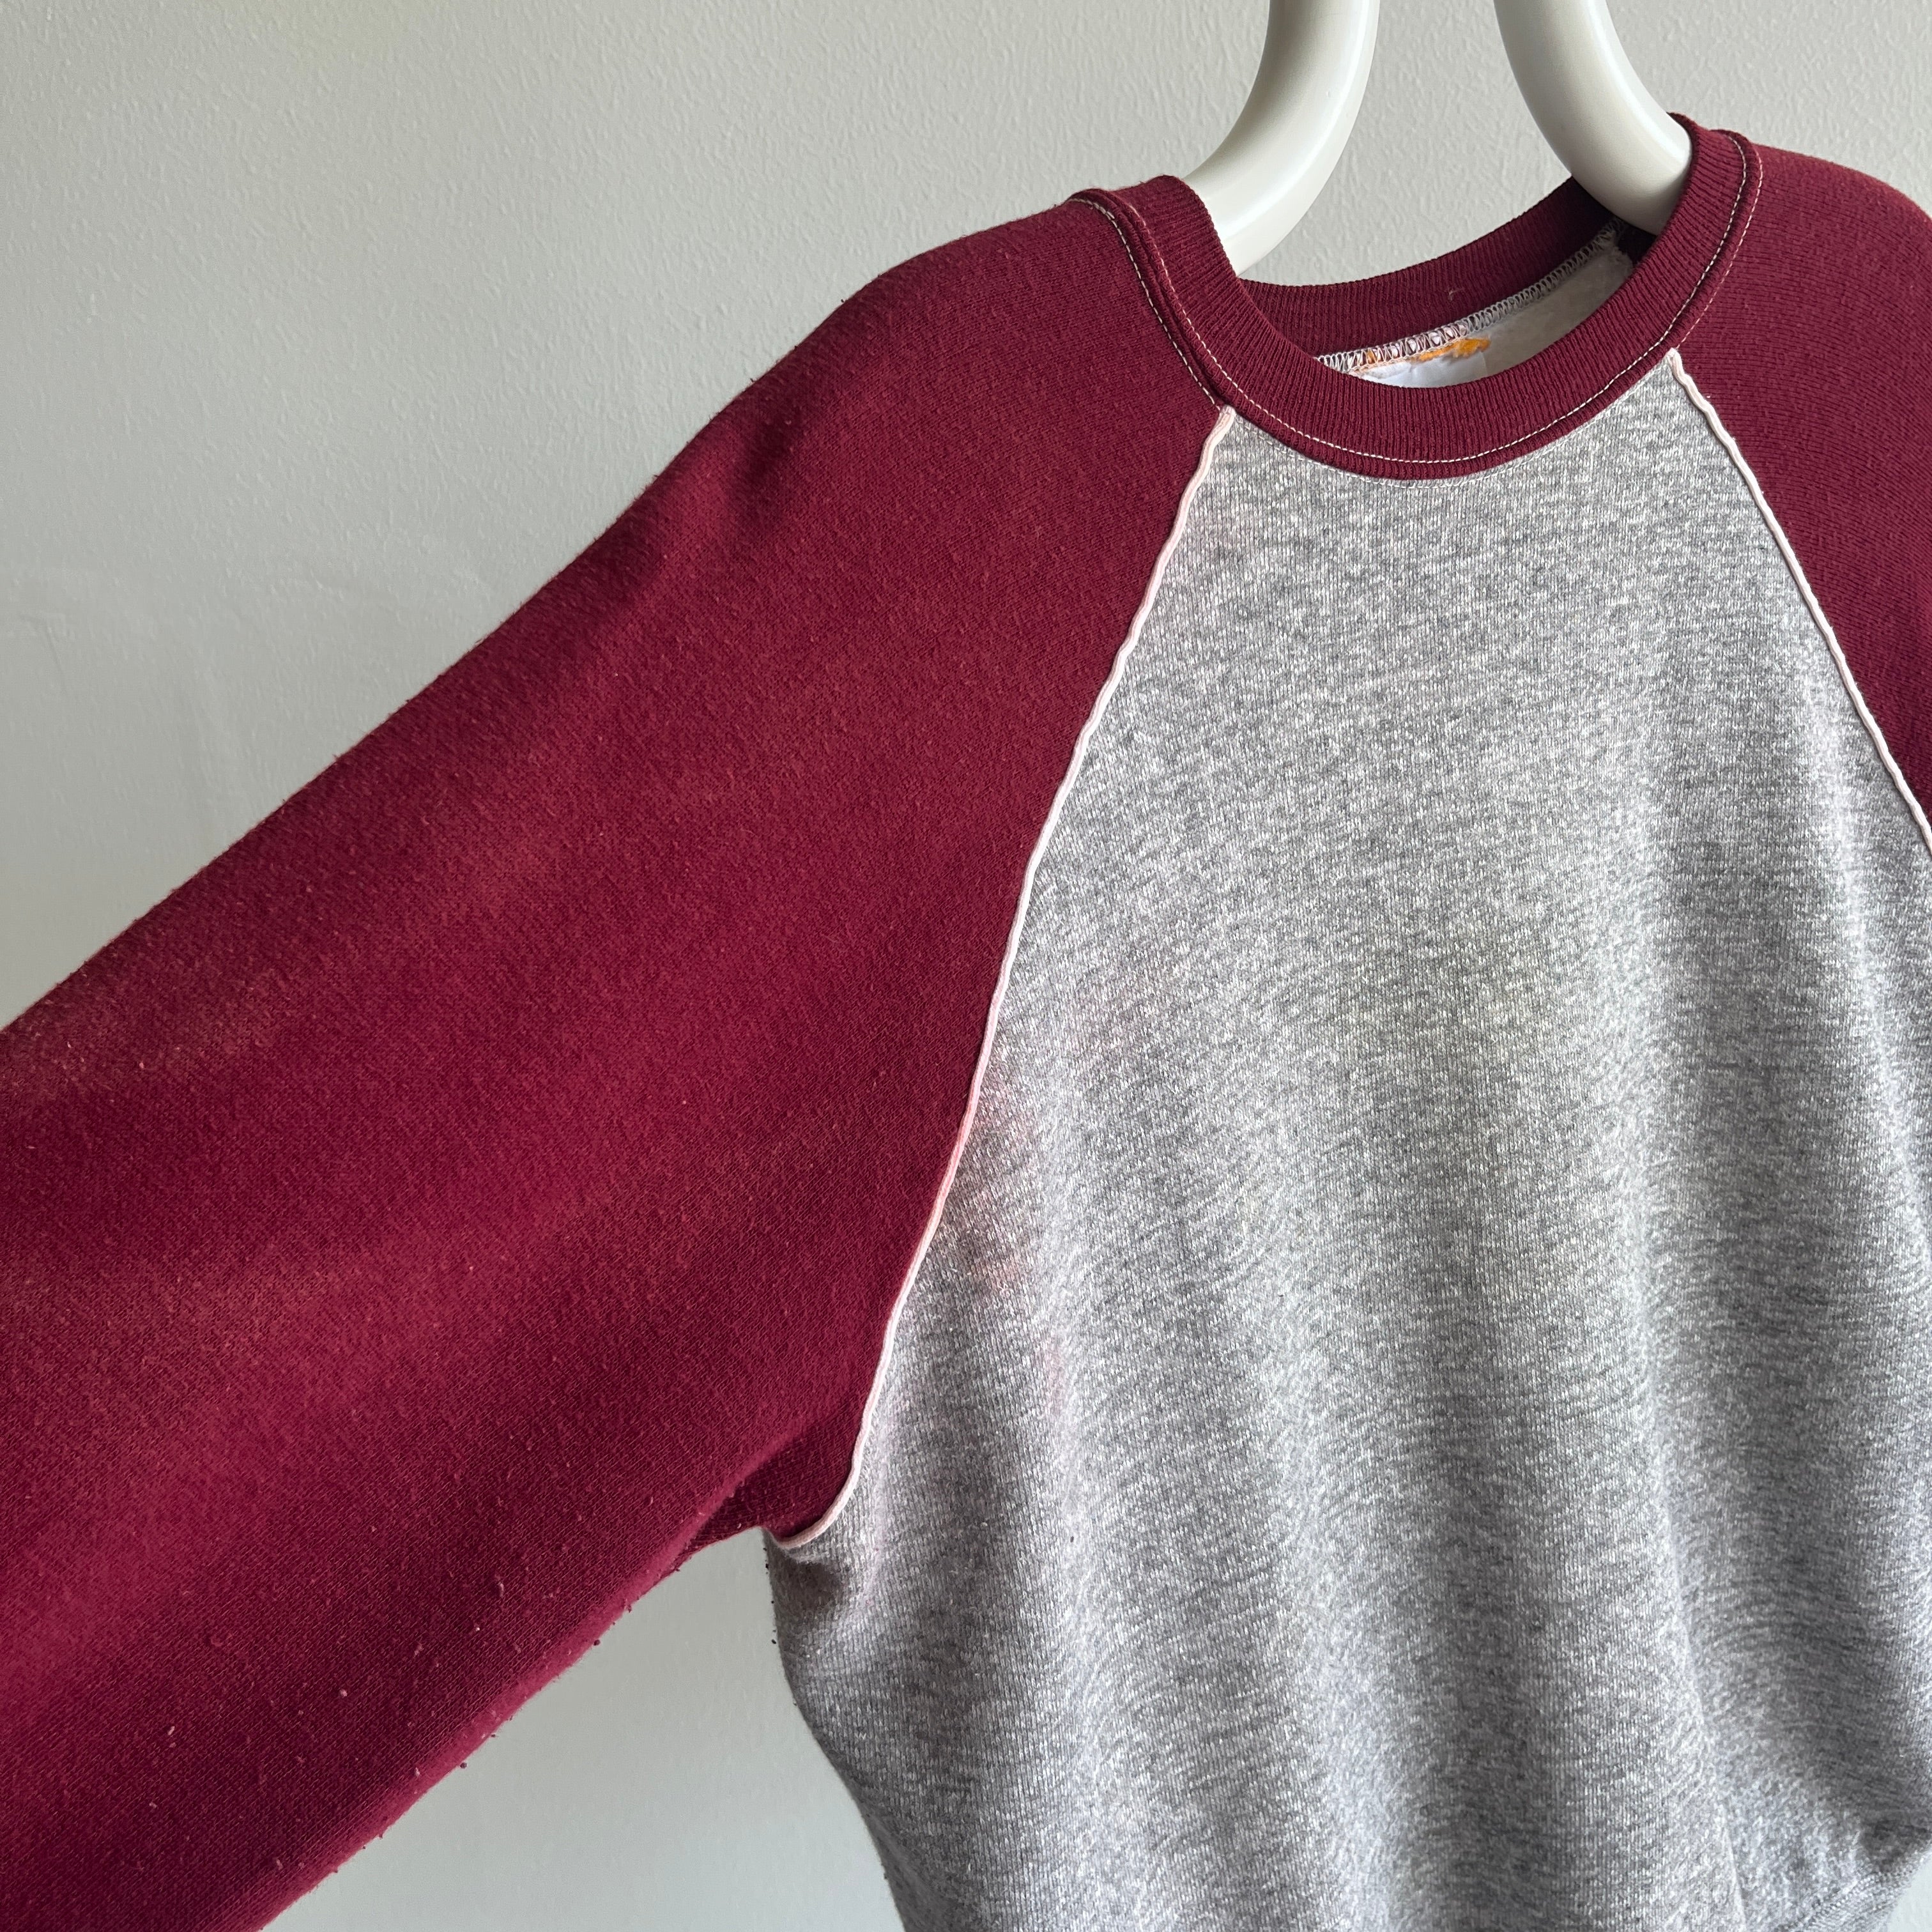 1970/80s Two Tone Baseball Sweatshirt with White Piping and Color Bleed